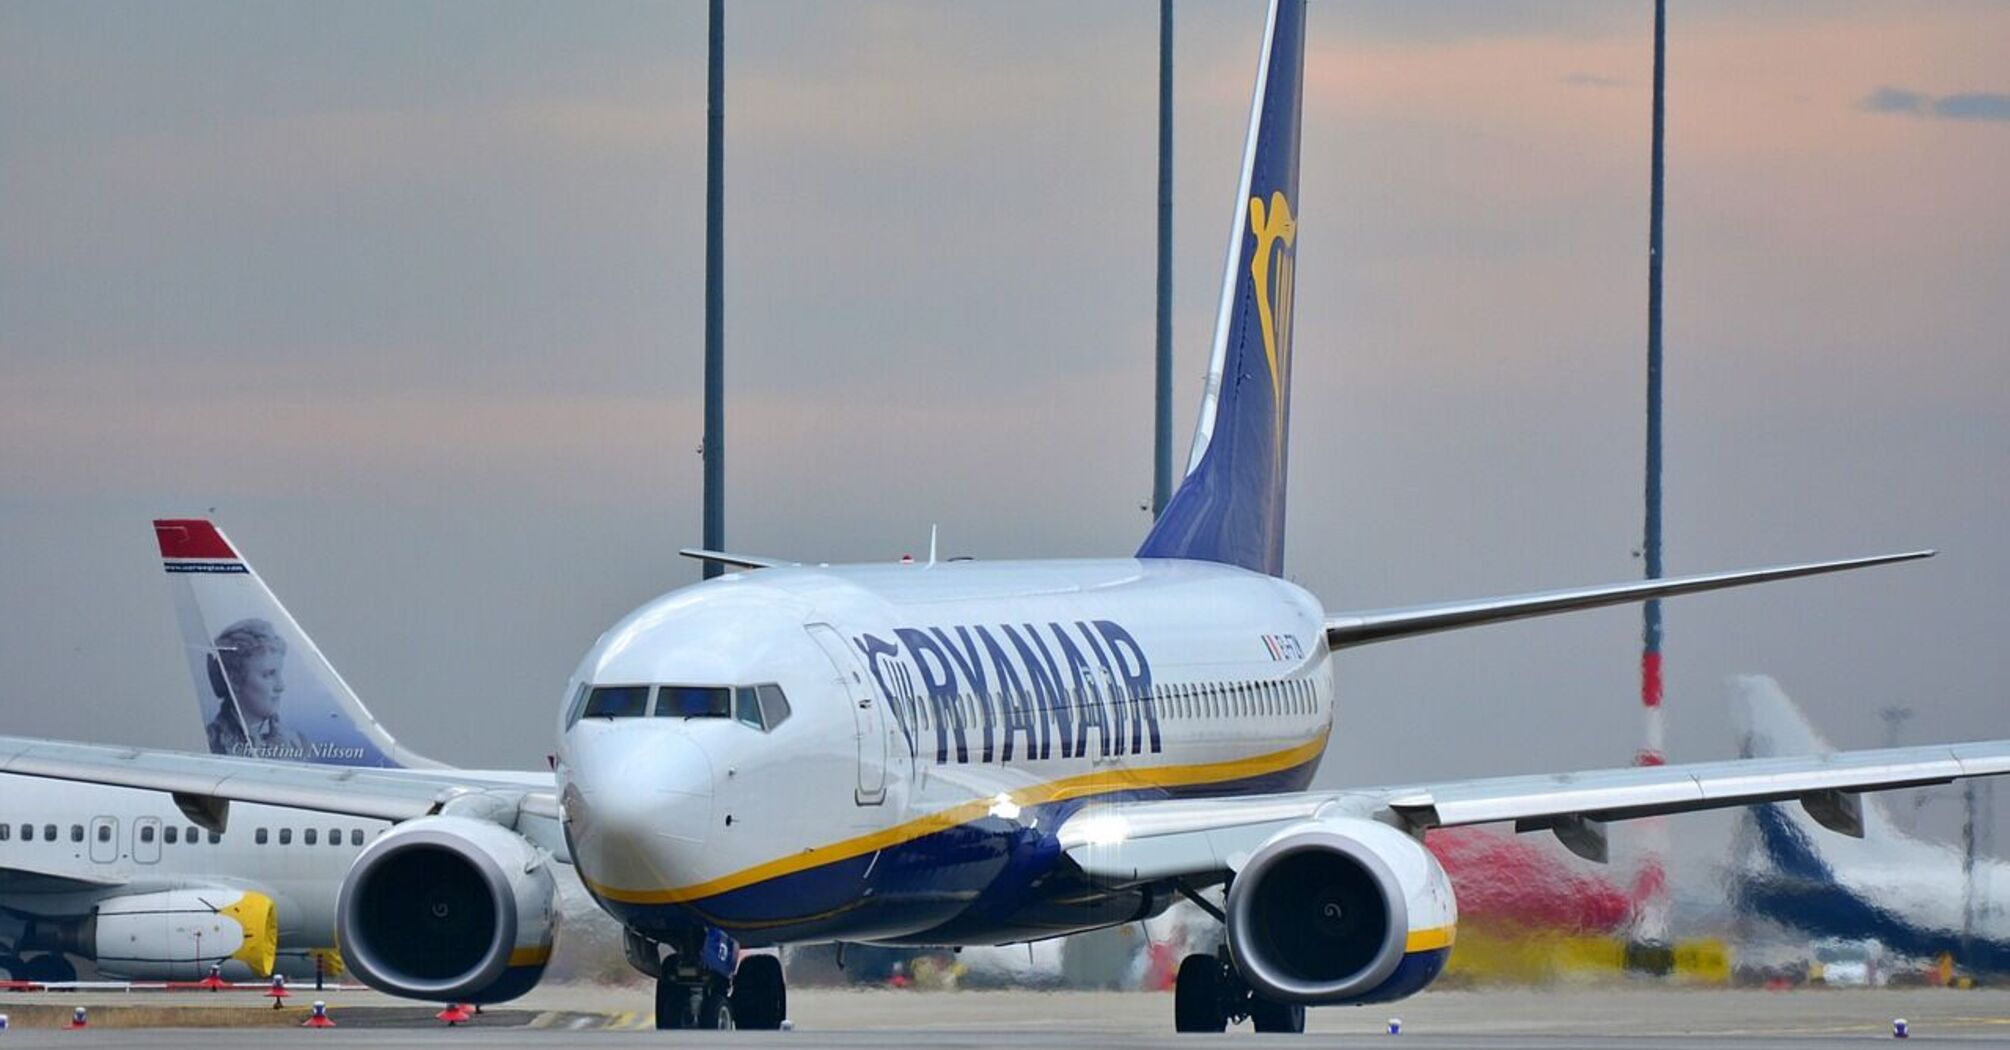 Budget flight: Ryanair launches new flights from 9 European cities